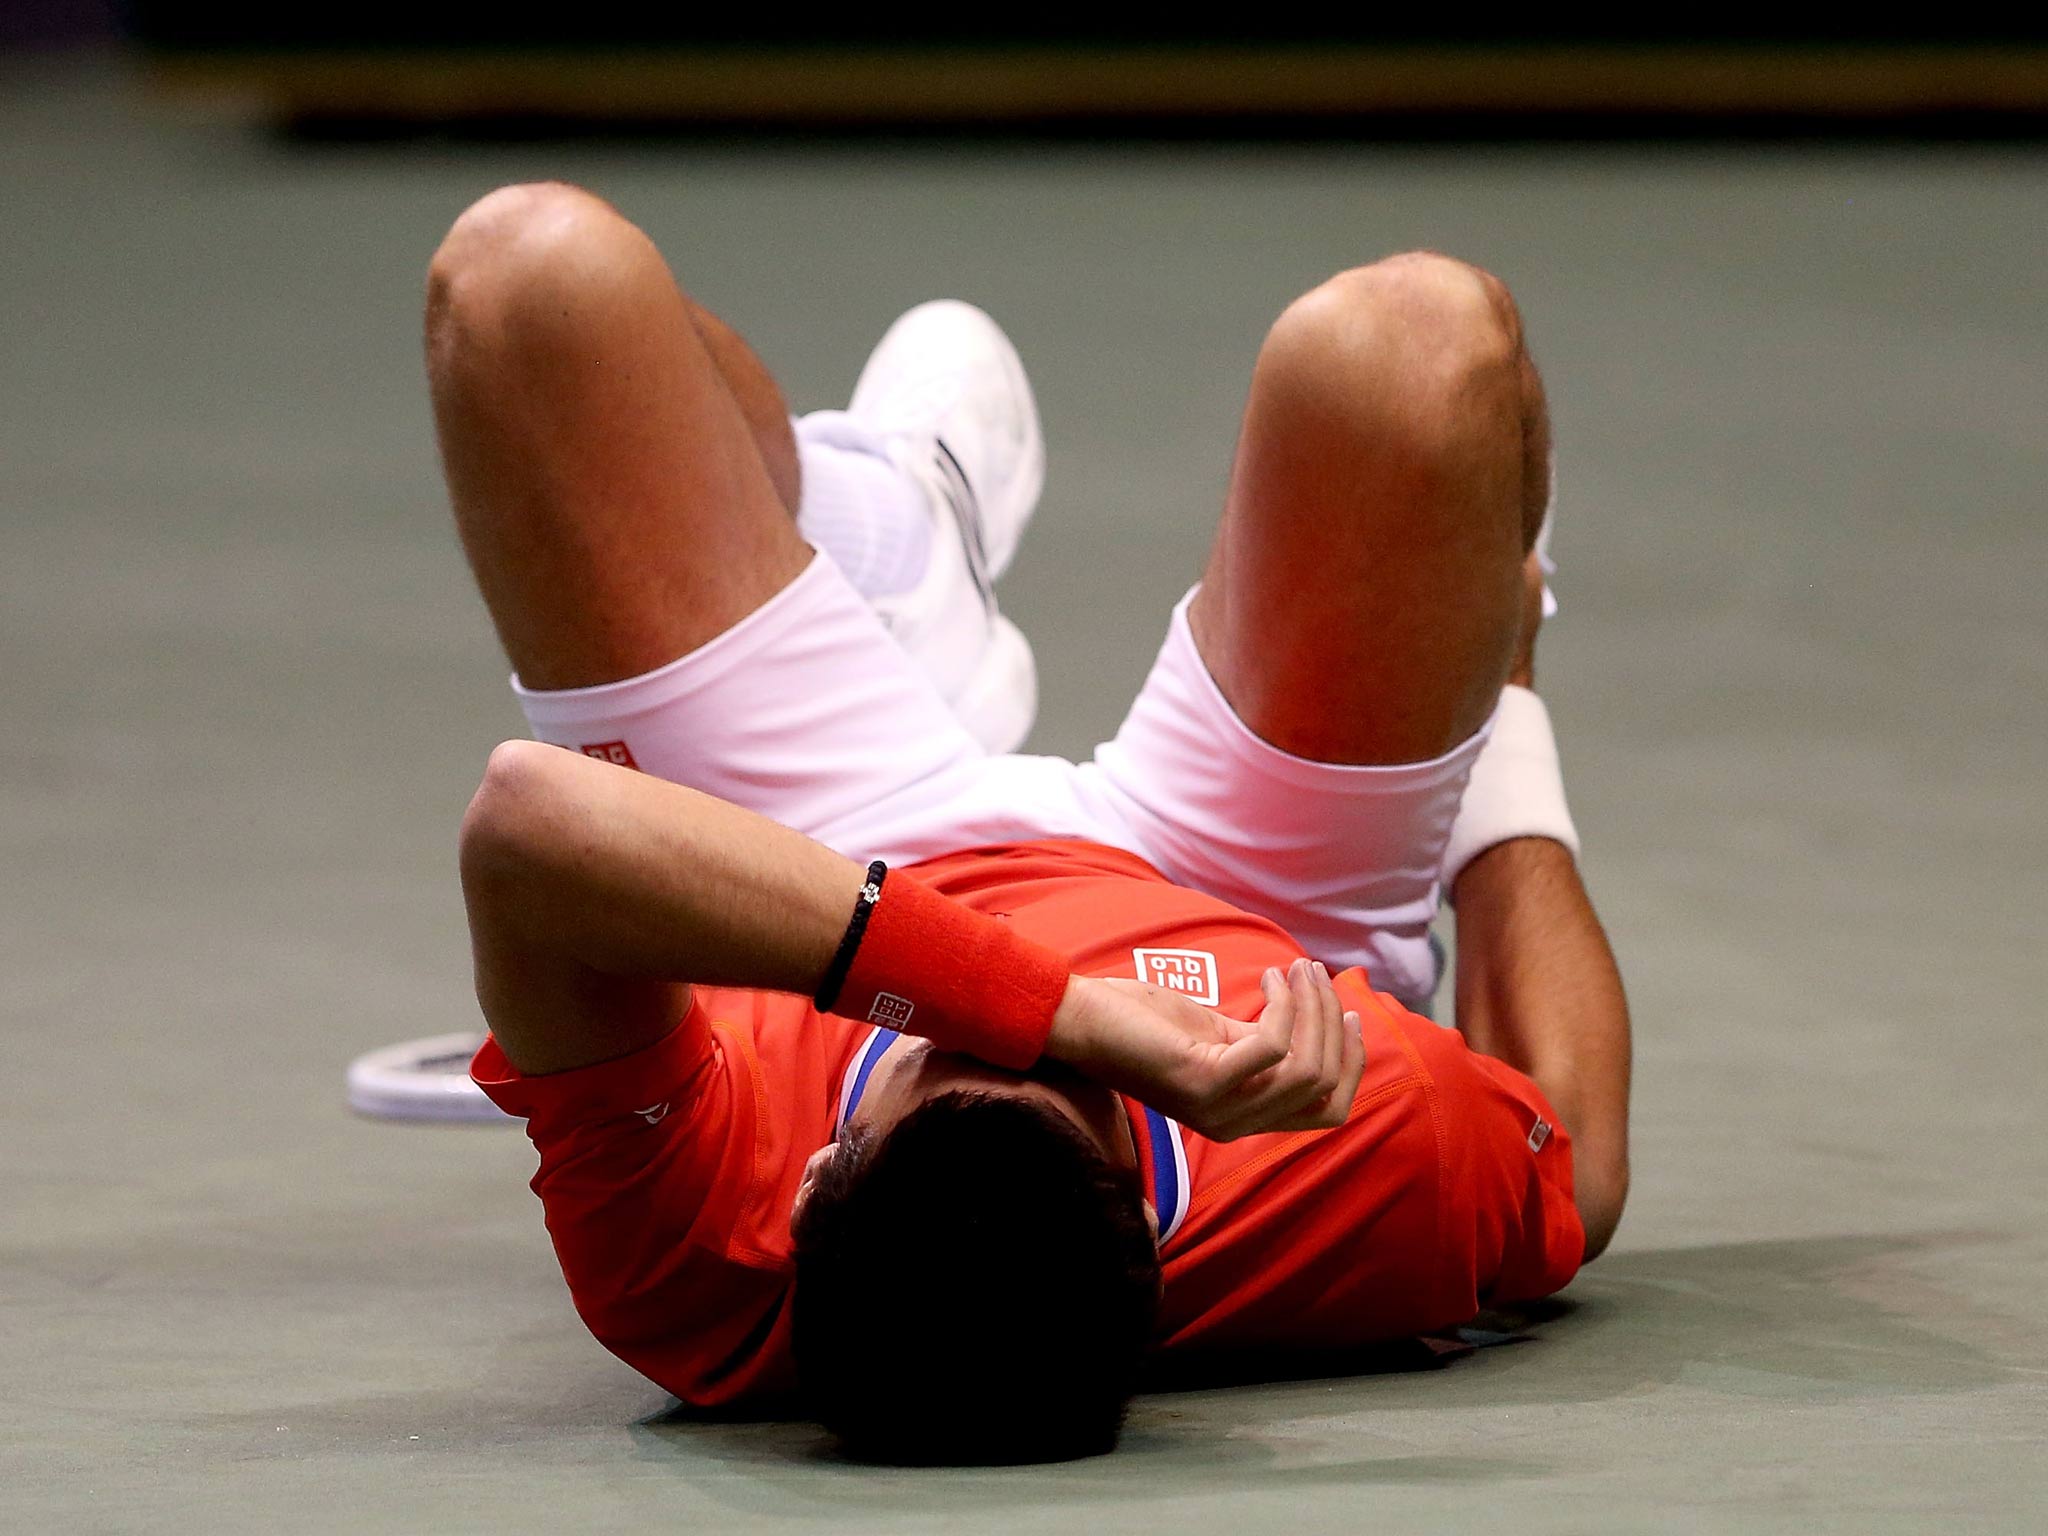 Novak Djokovic of Serbia falls to the court in pain after injuring his ankle on Davis Cup duty